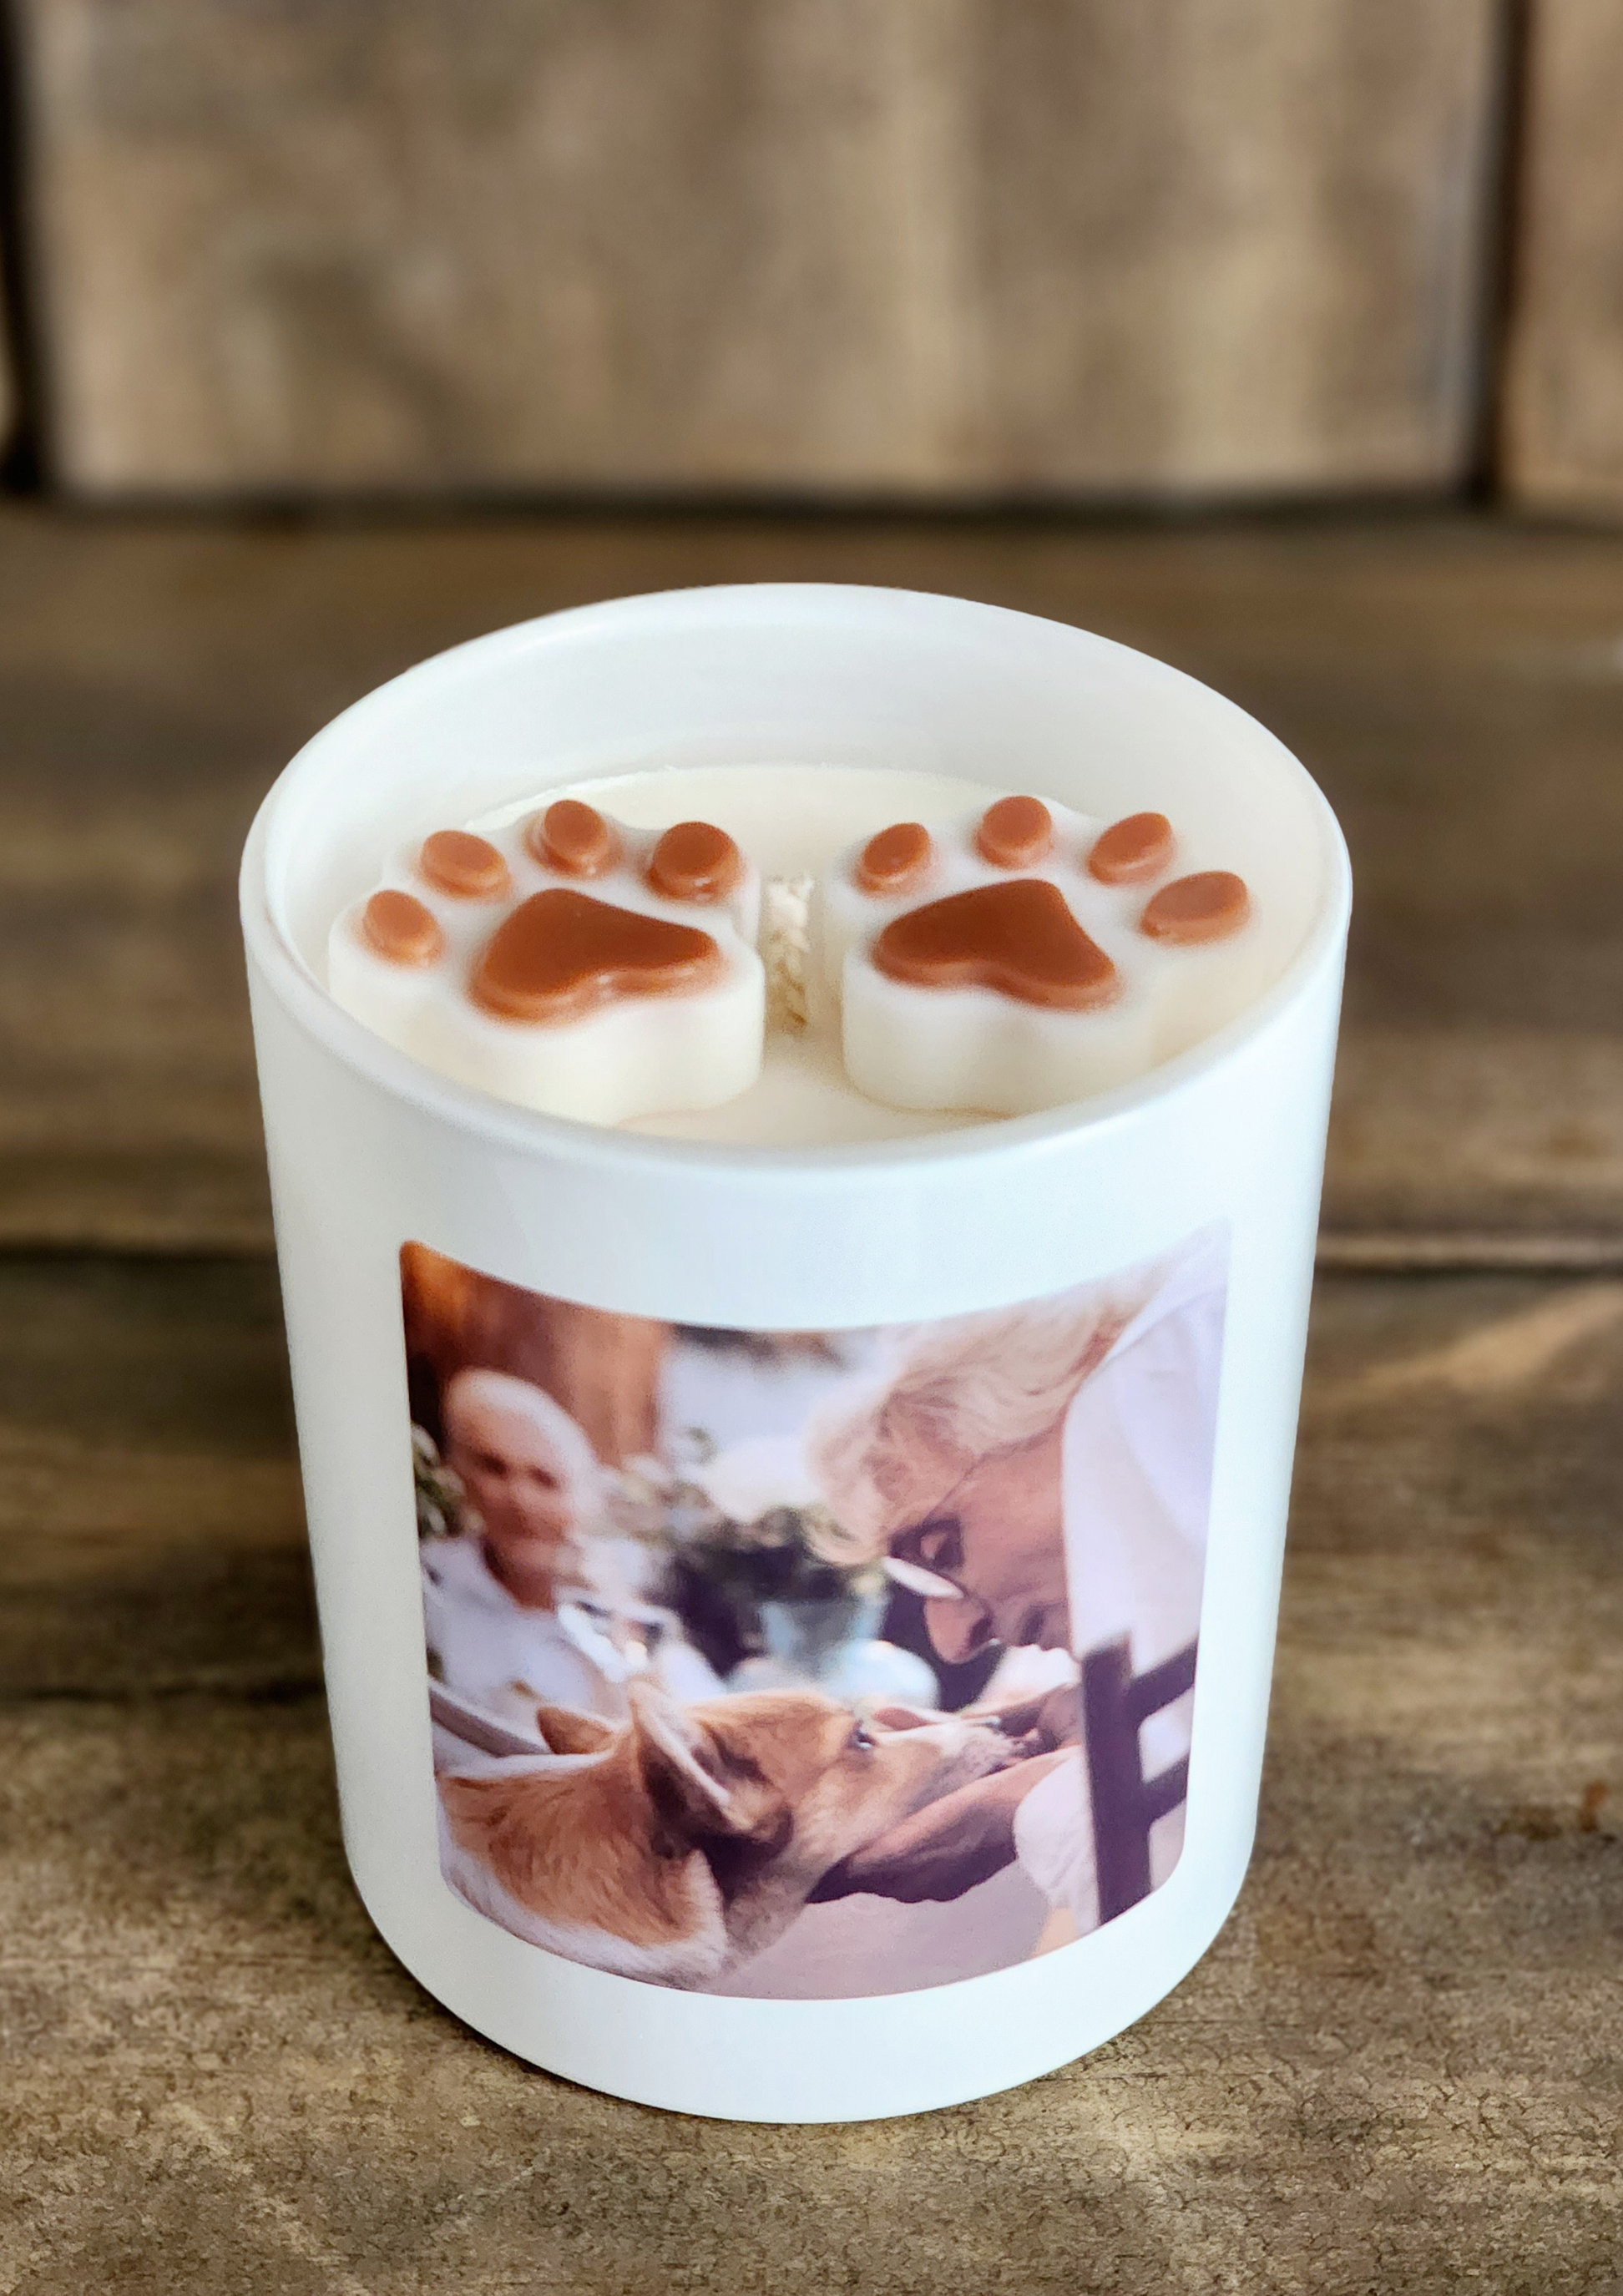 personalised dog candles custom dog candles dog lover candles handmade dog candles dog themed pet candles gift for dog owners soy wax